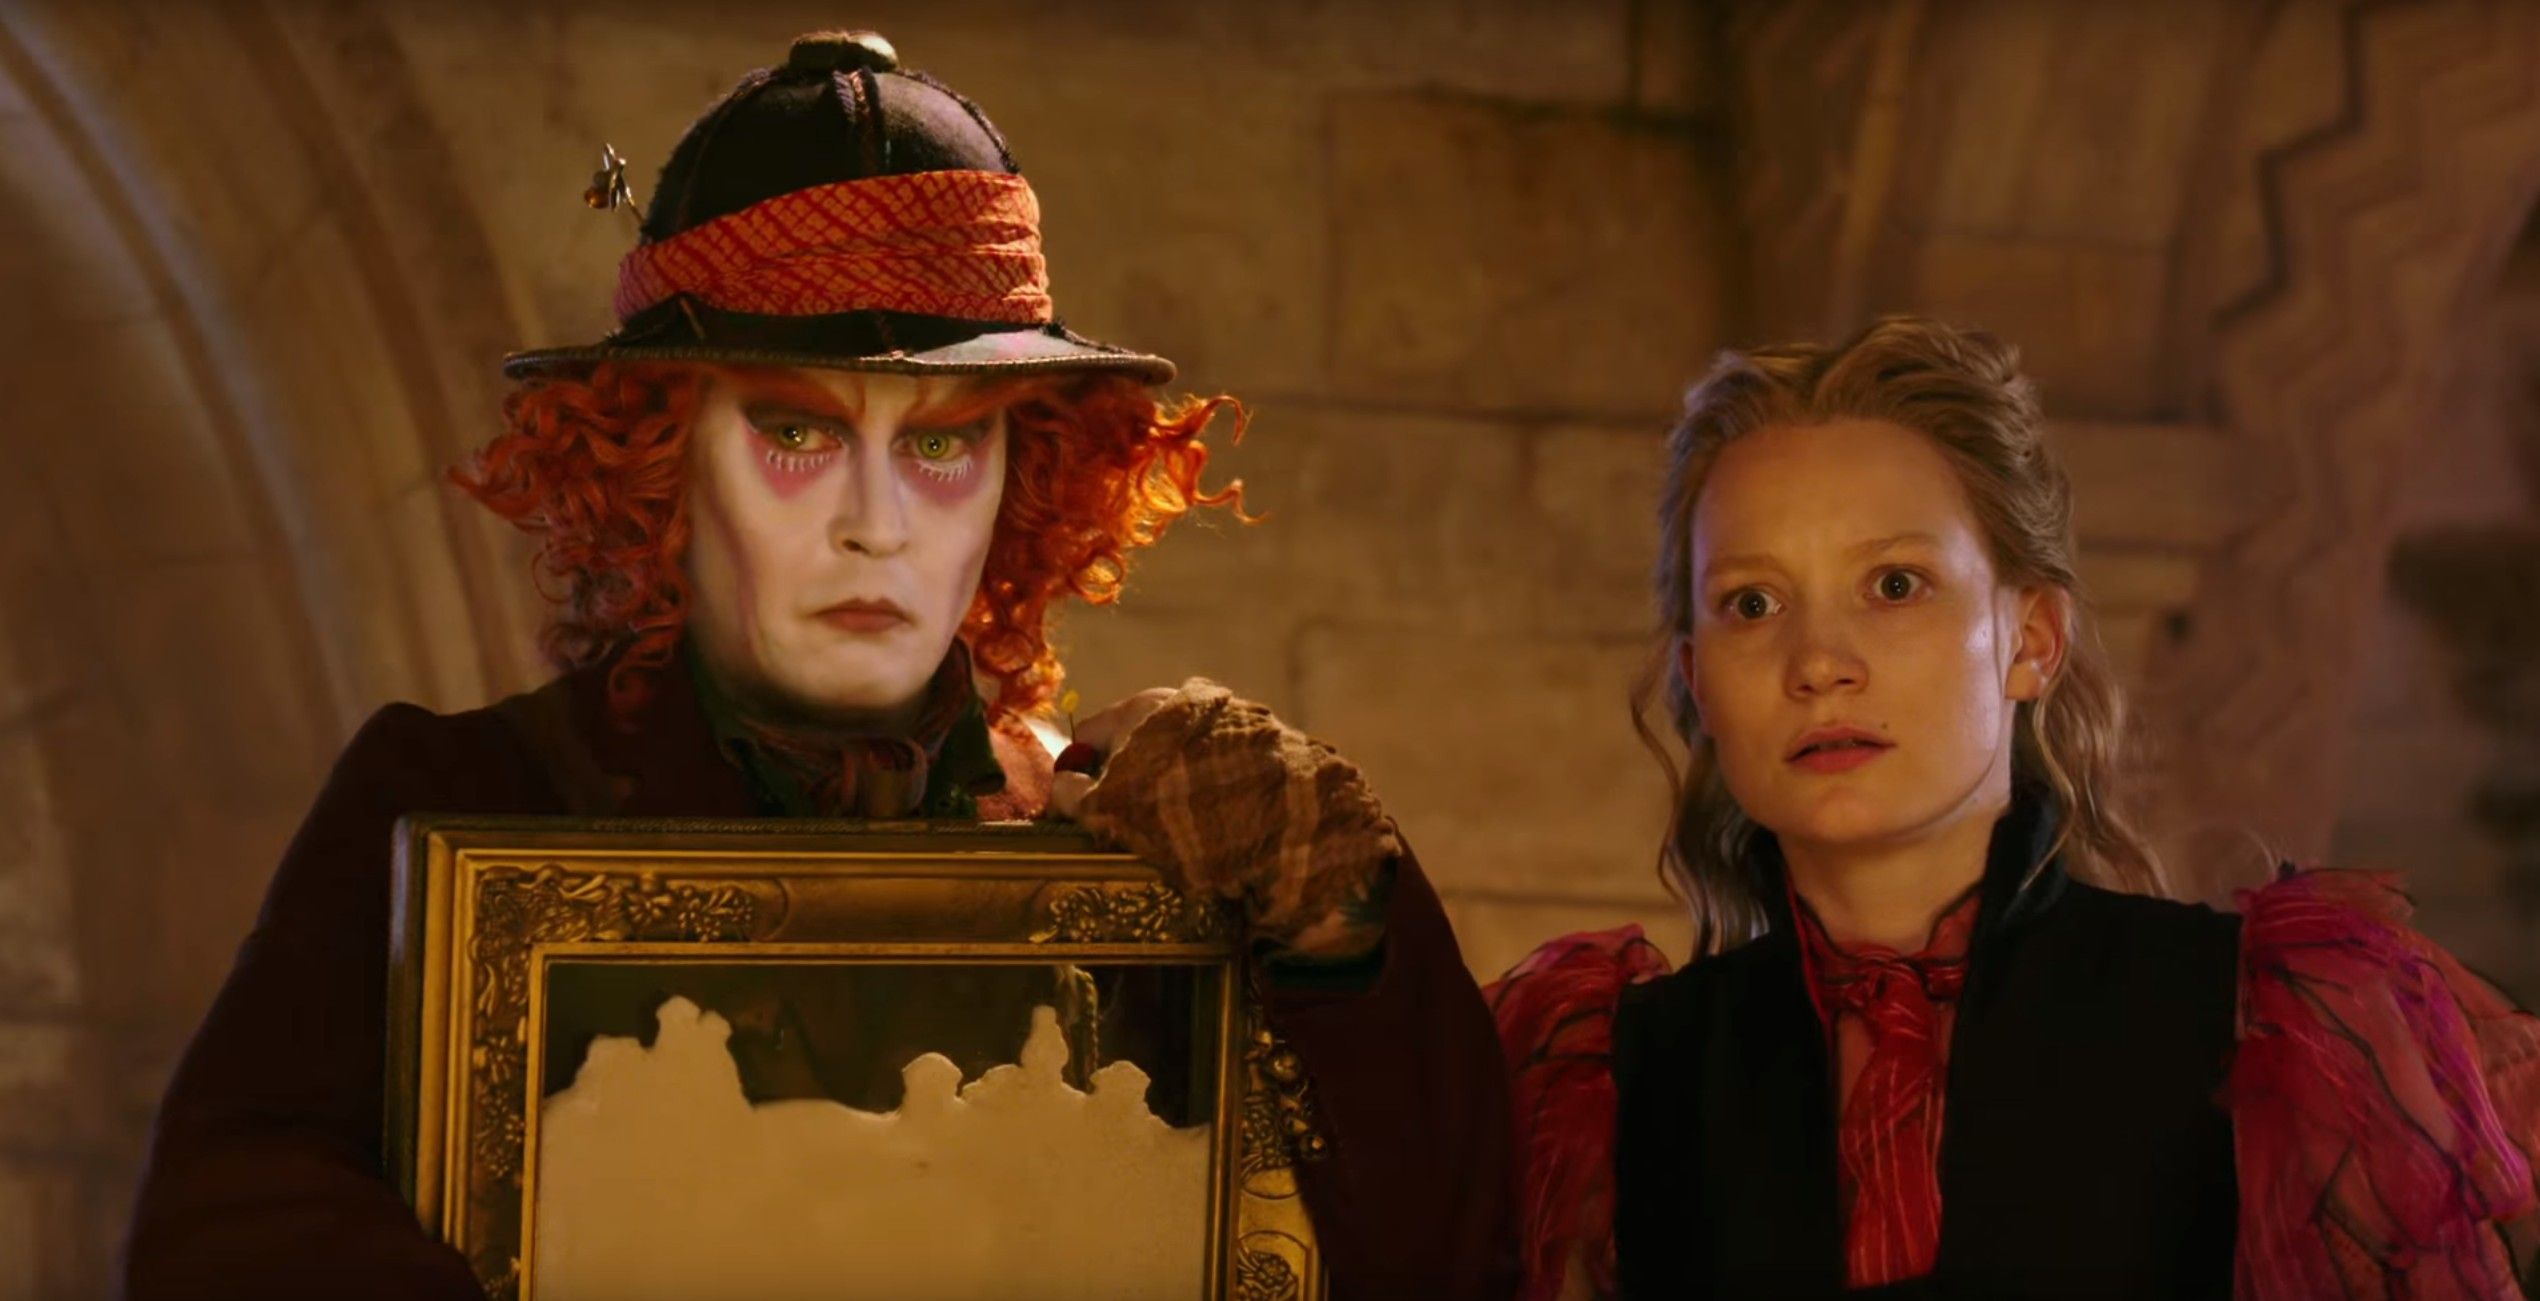 Johnny Depp is back in Alice Through the Looking Glass